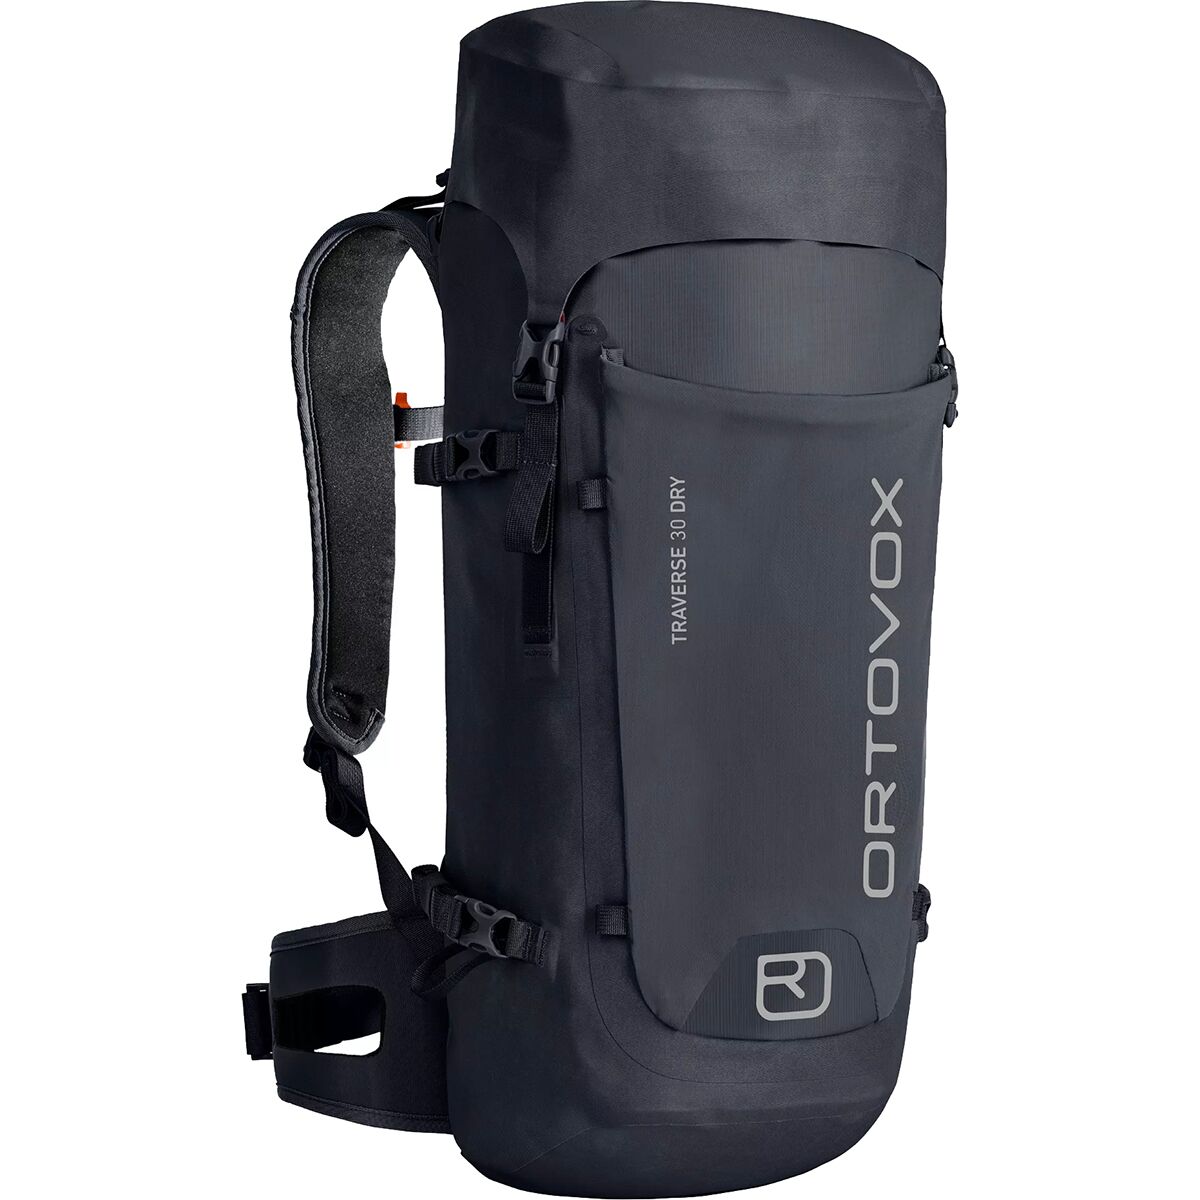 Ortovox Traverse 30L Dry Backpack